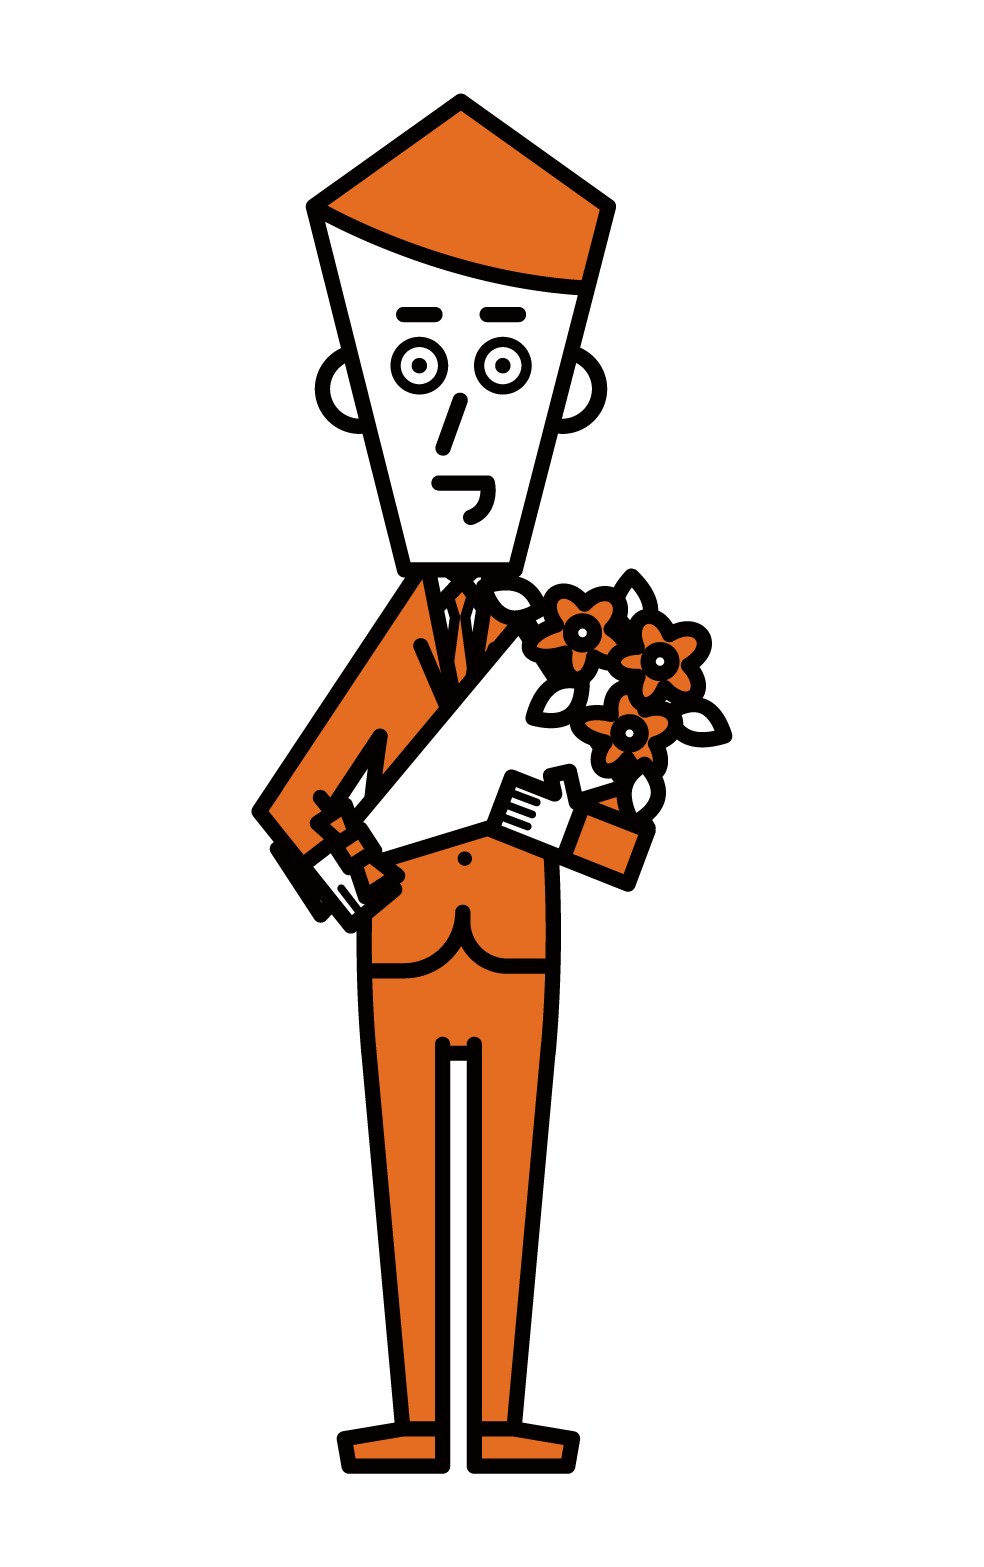 Illustration of a man giving a bouquet of flowers